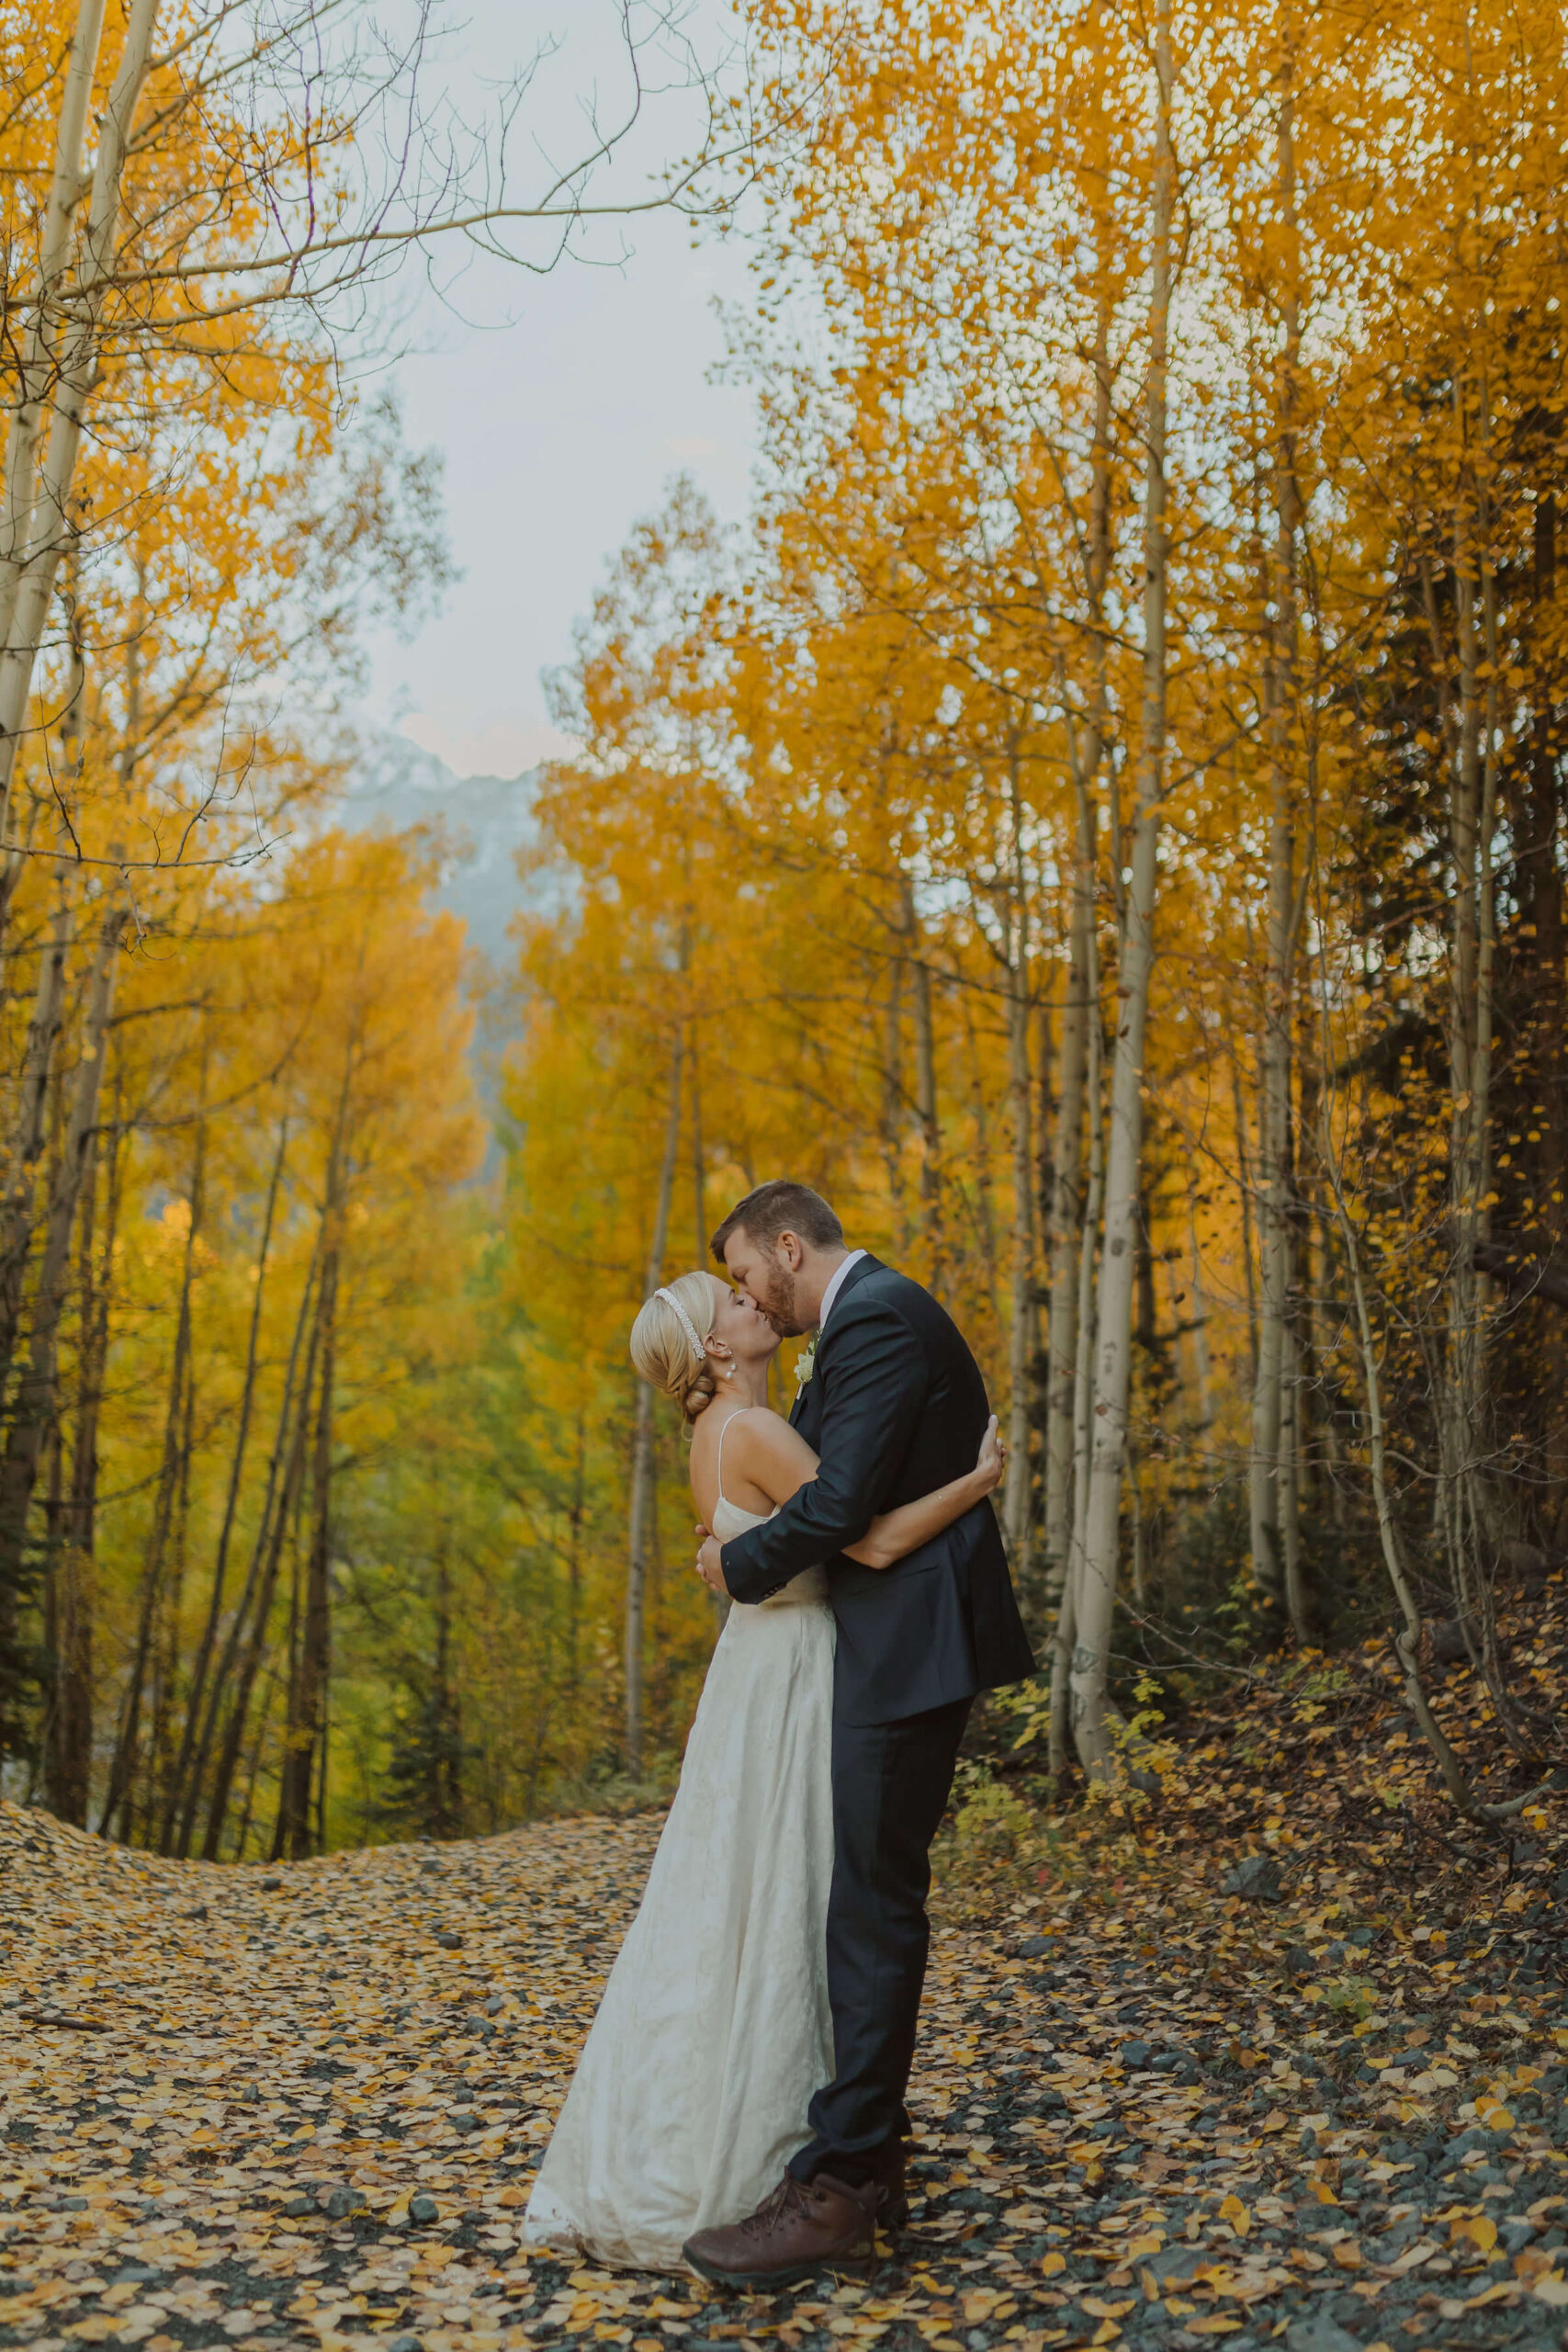 Ouray elopement couple posing surrounded by trees and fall foliage